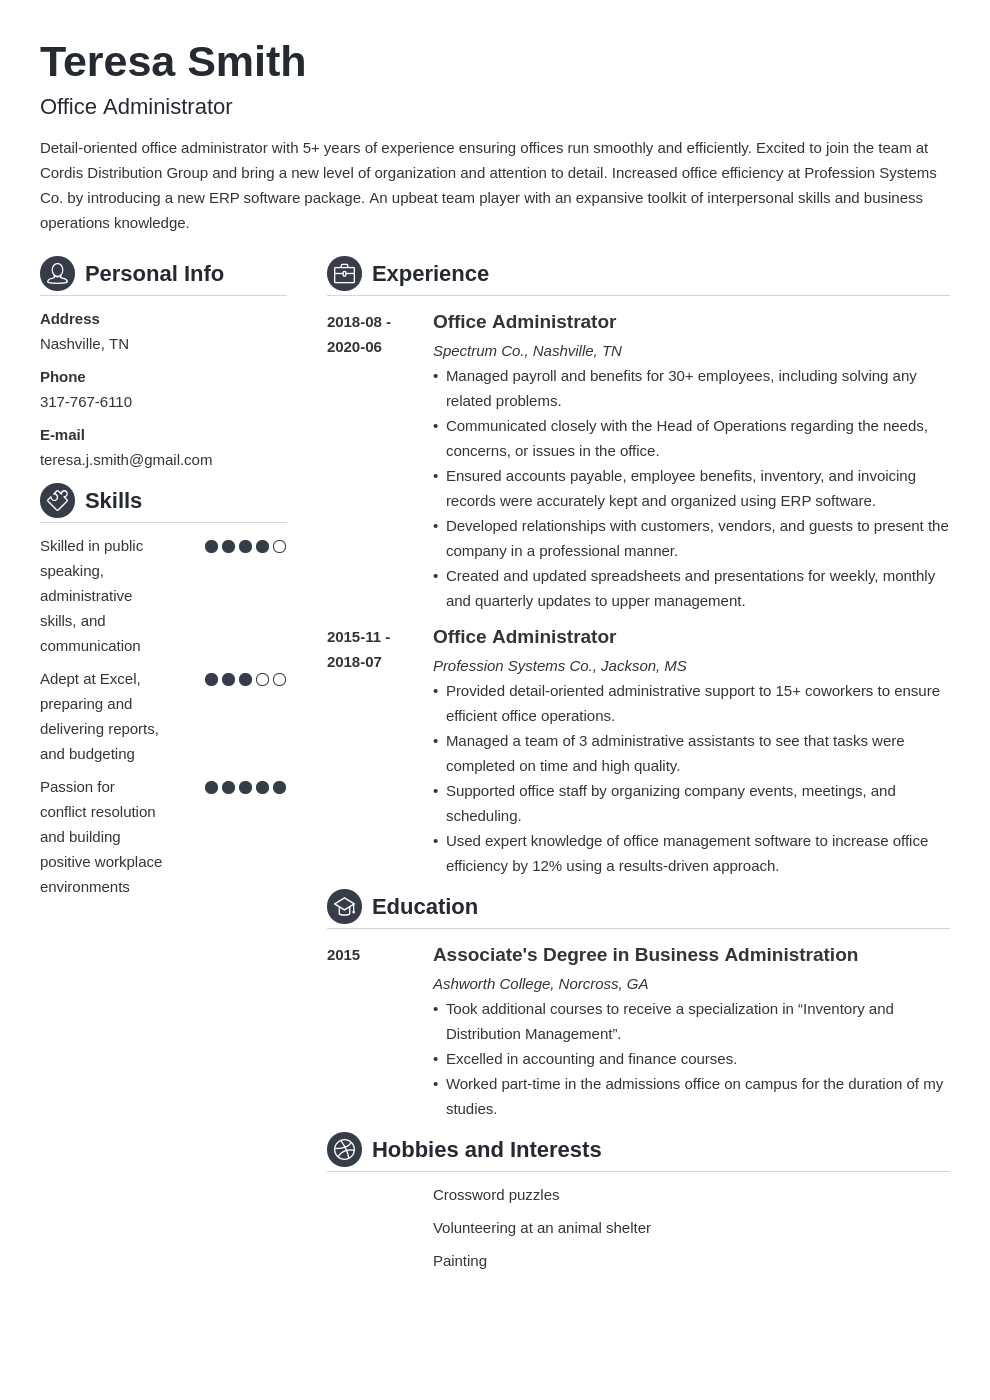 resume example for office administrator